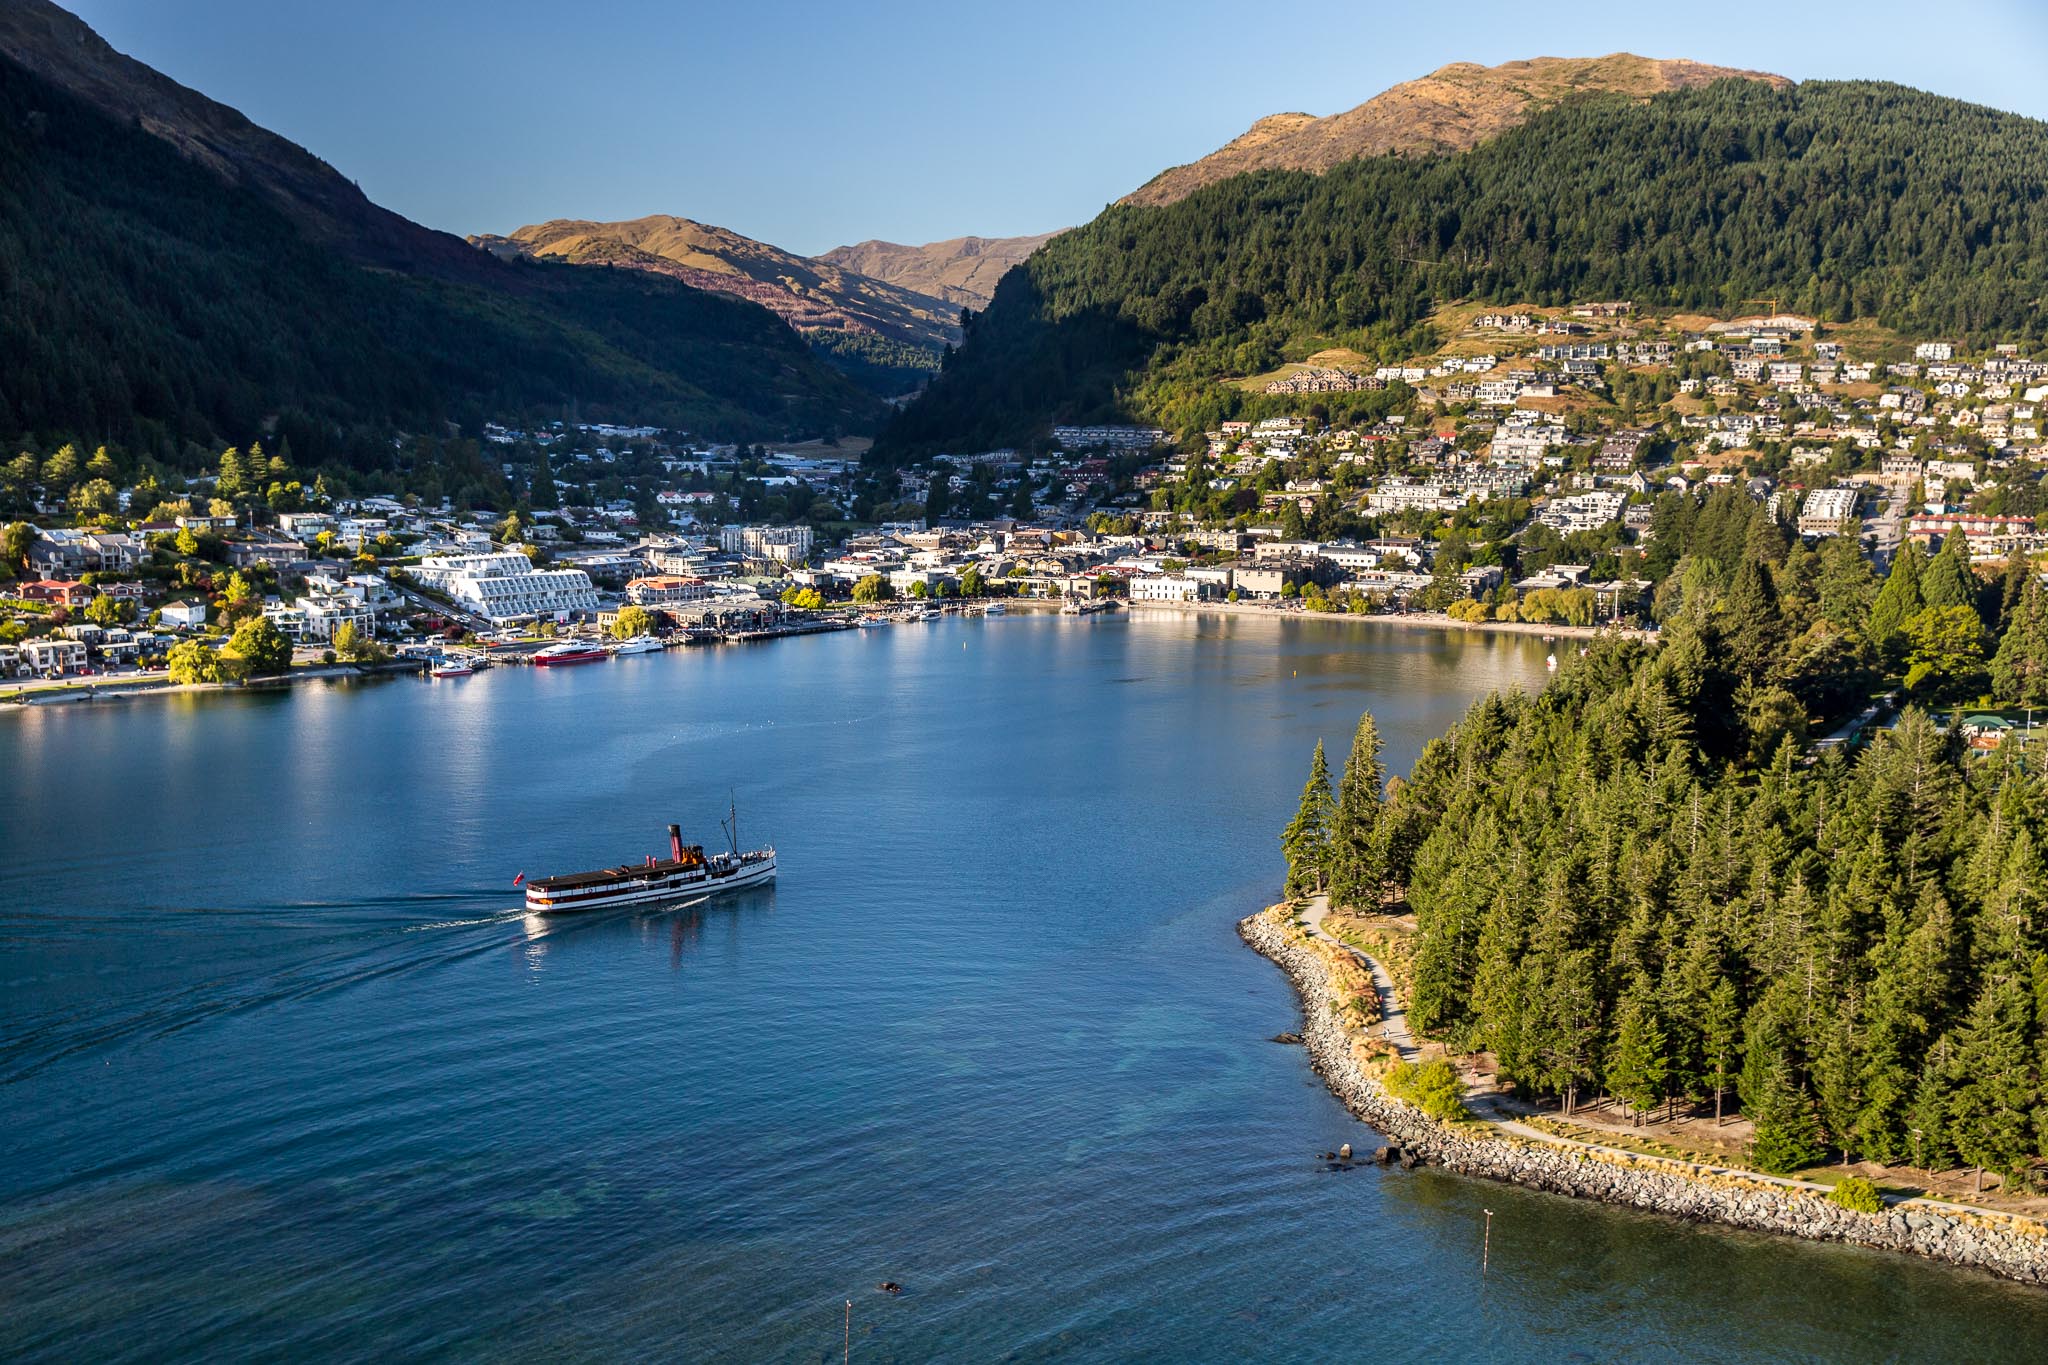 TSS Earnslaw Vintage Steamship cruising into Queenstown Bay